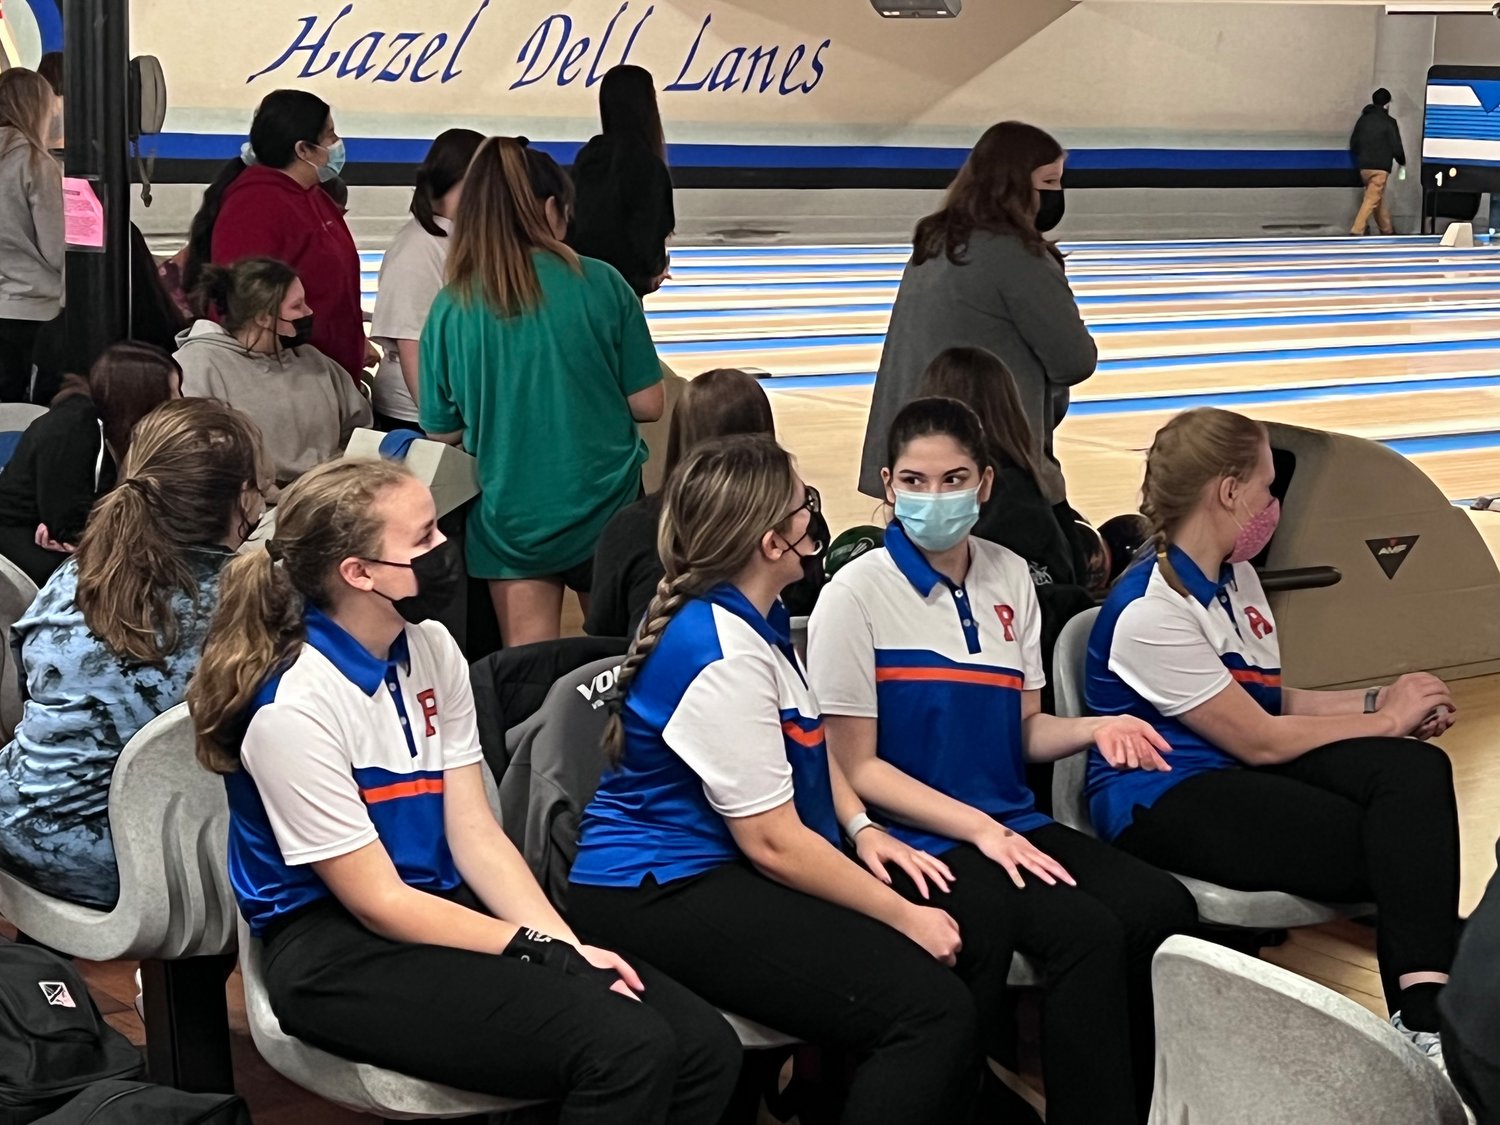 A group of Ridgefield bowlers watch their teammate play.